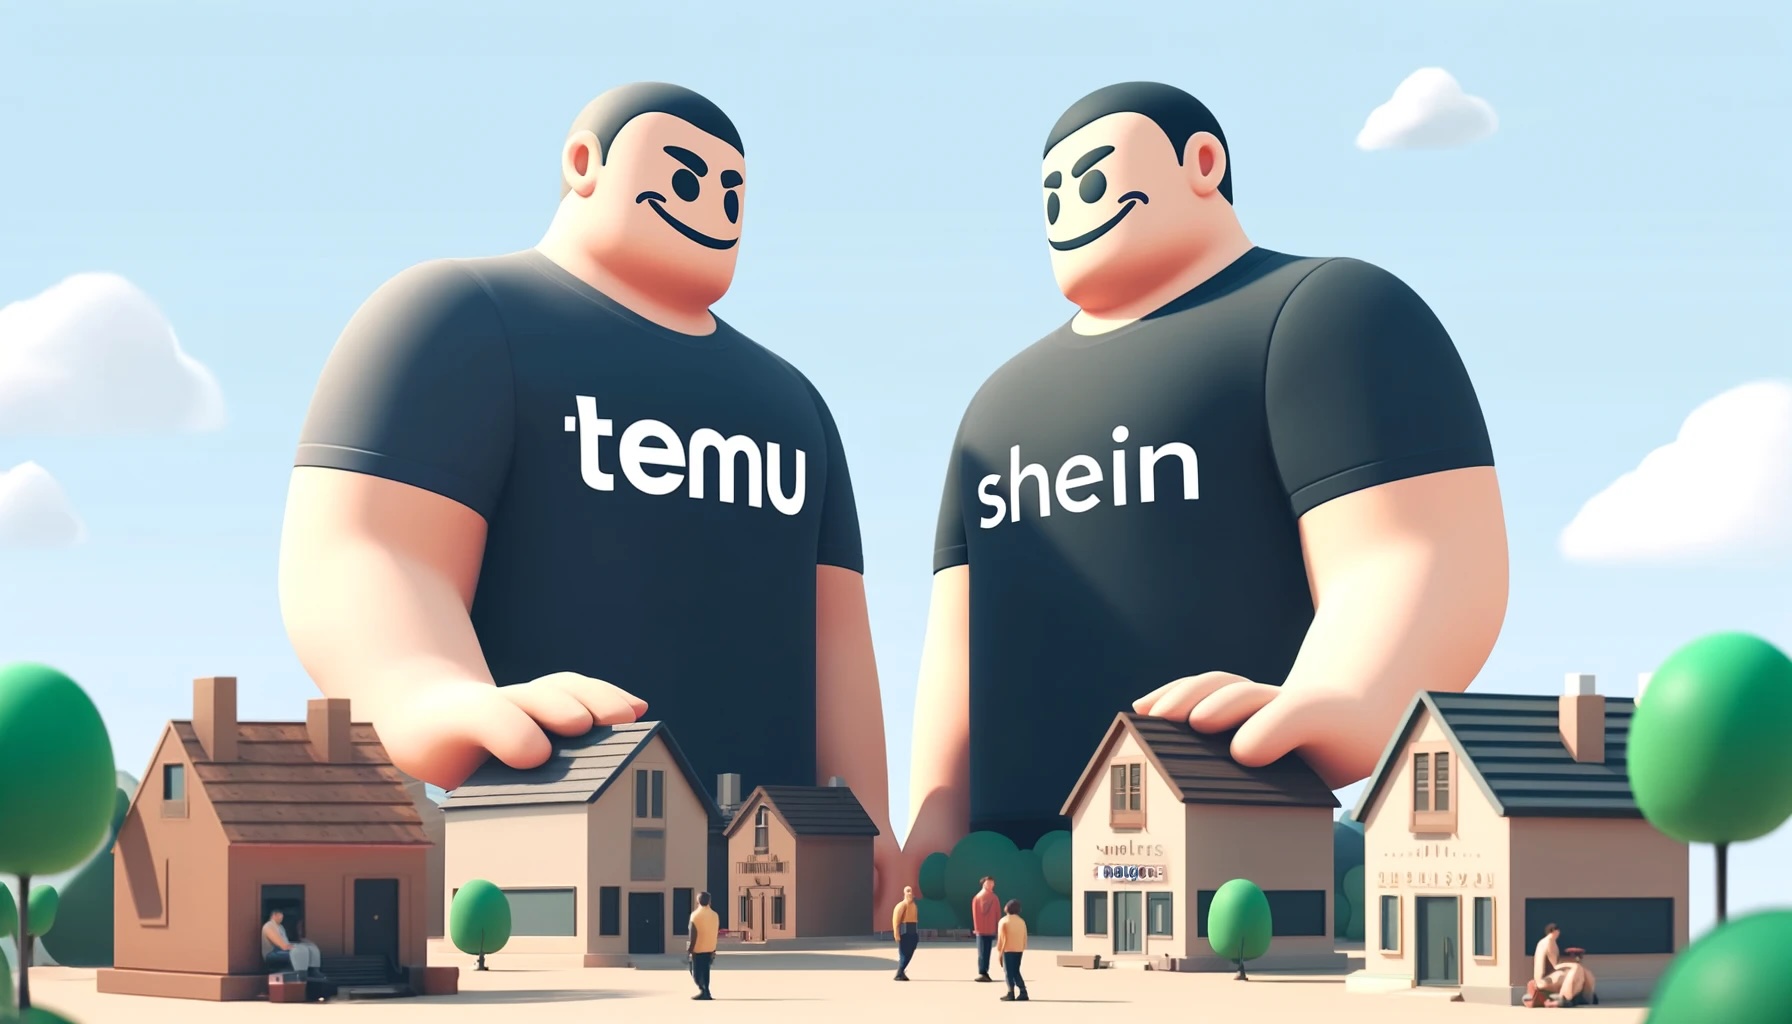 Two large cartoon style giants with the Temu and Shein logos are towering above a small village